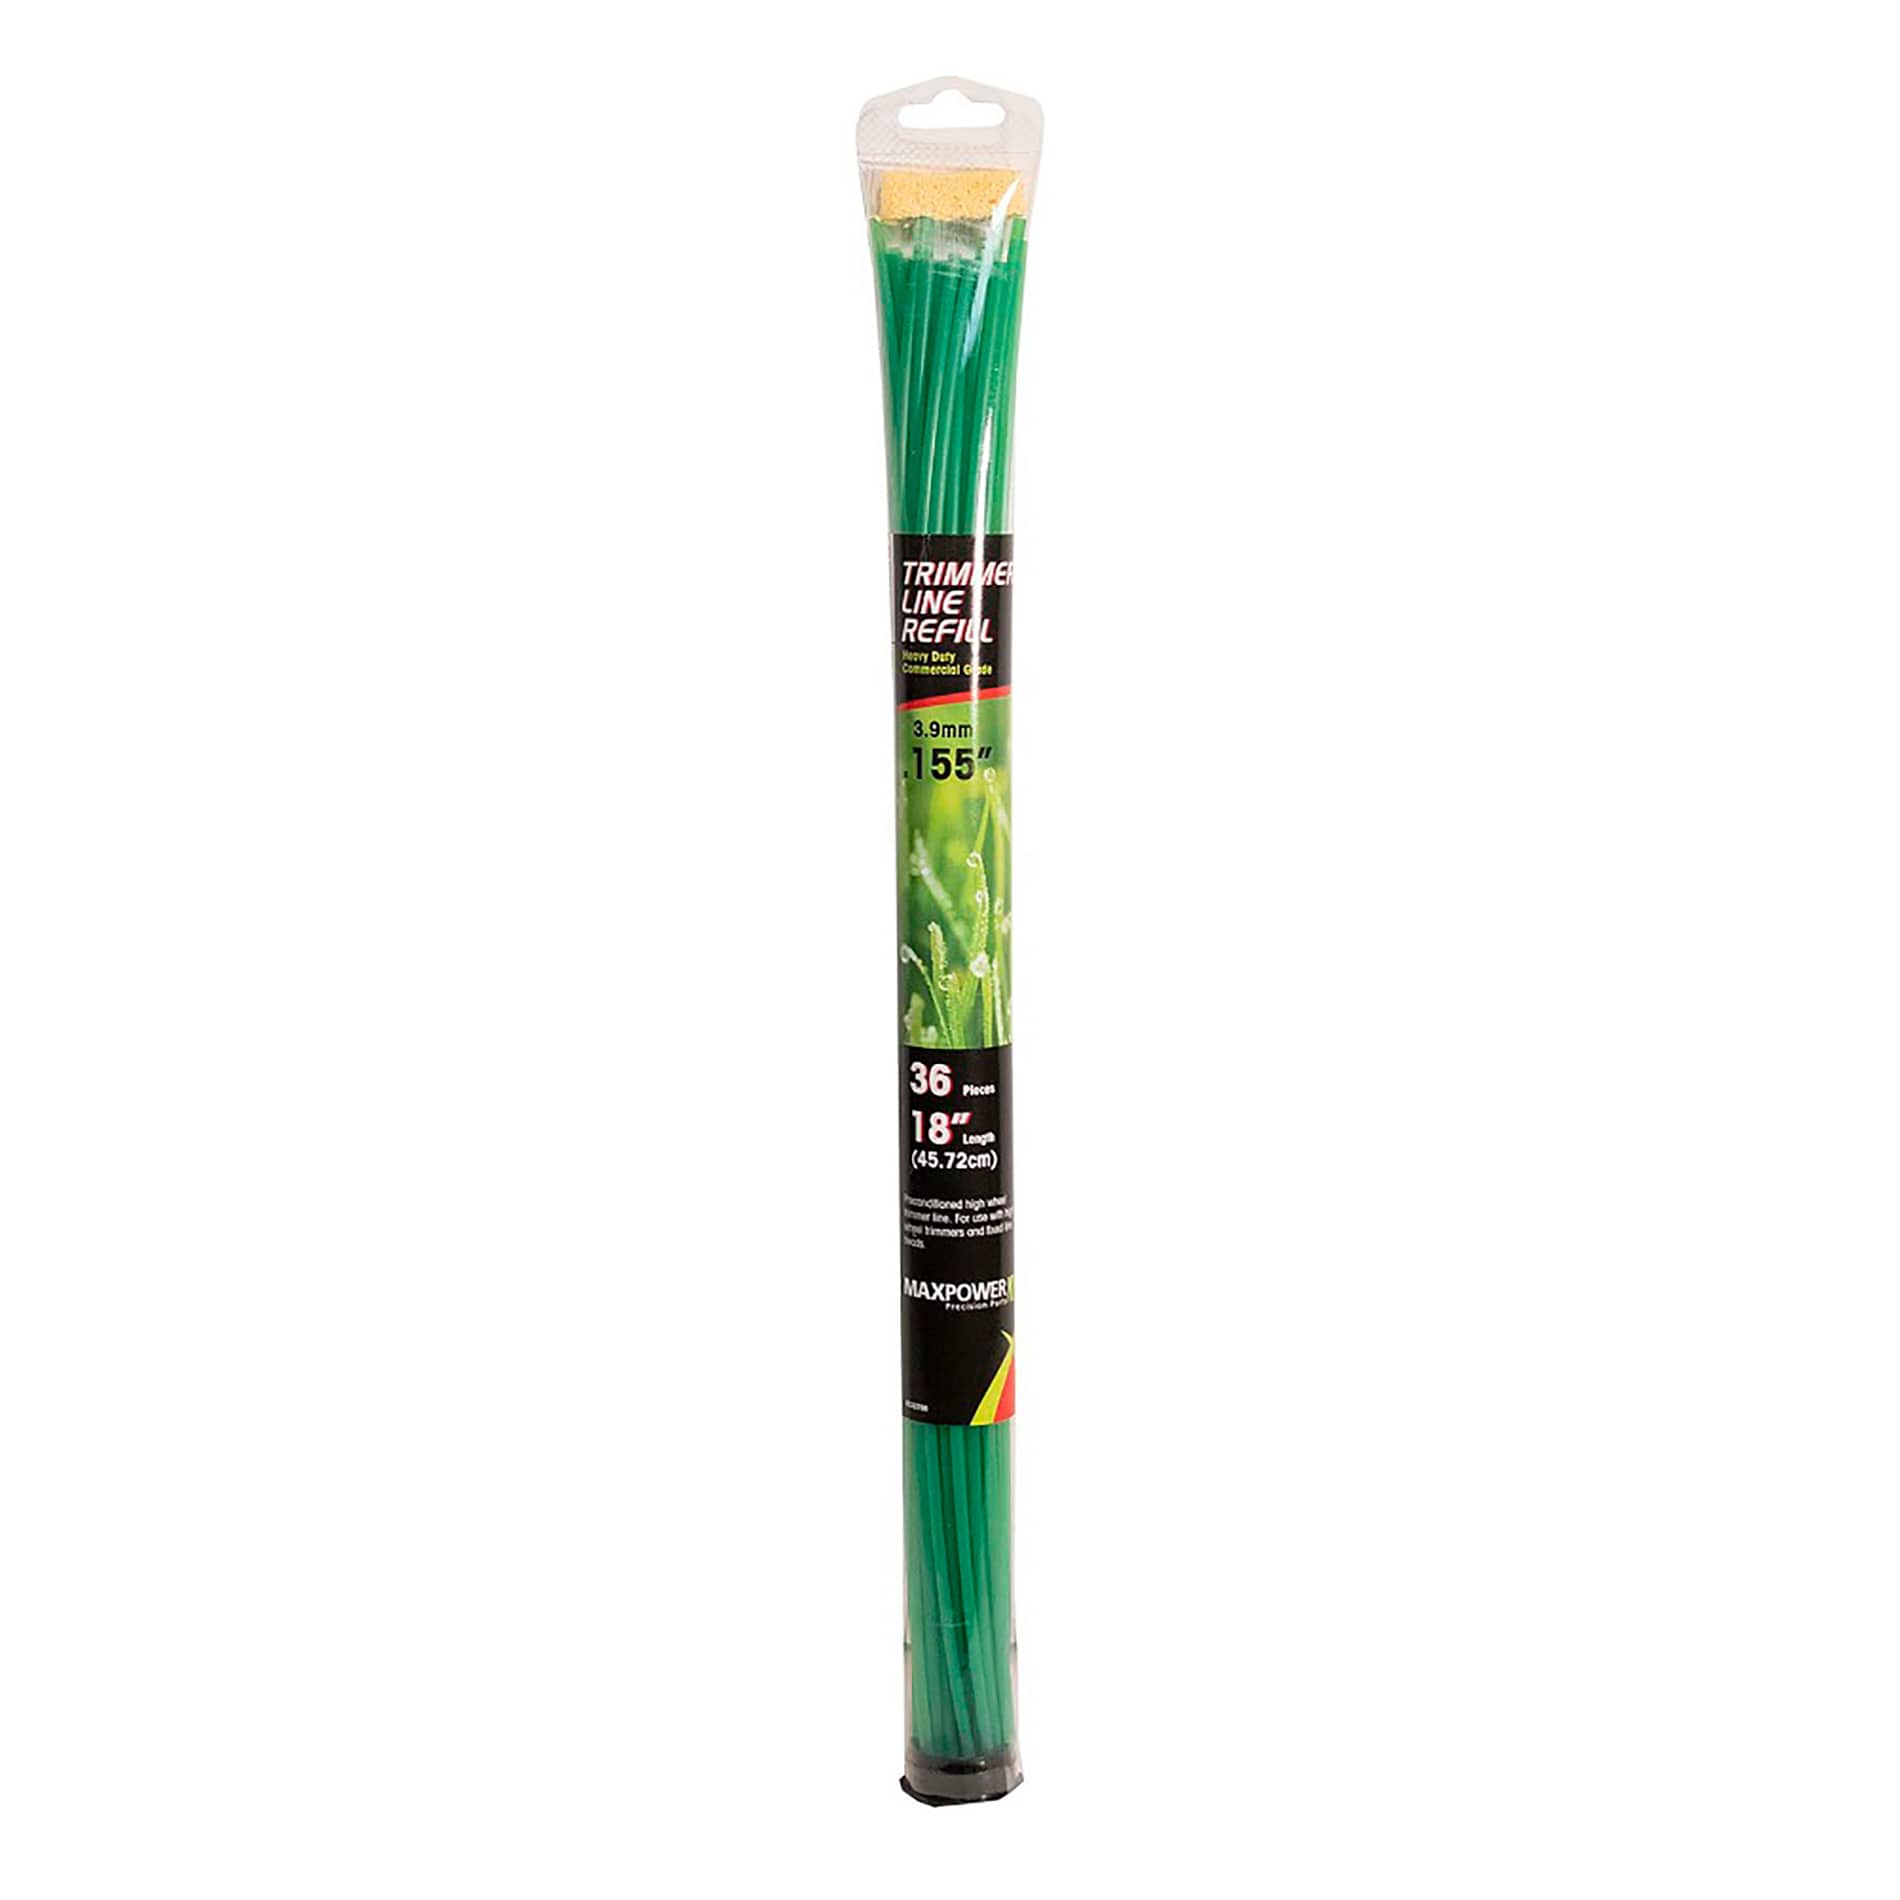 Maxpower 0.155 x 18 Trimmer Line Refill Green - 36 Count | 333750